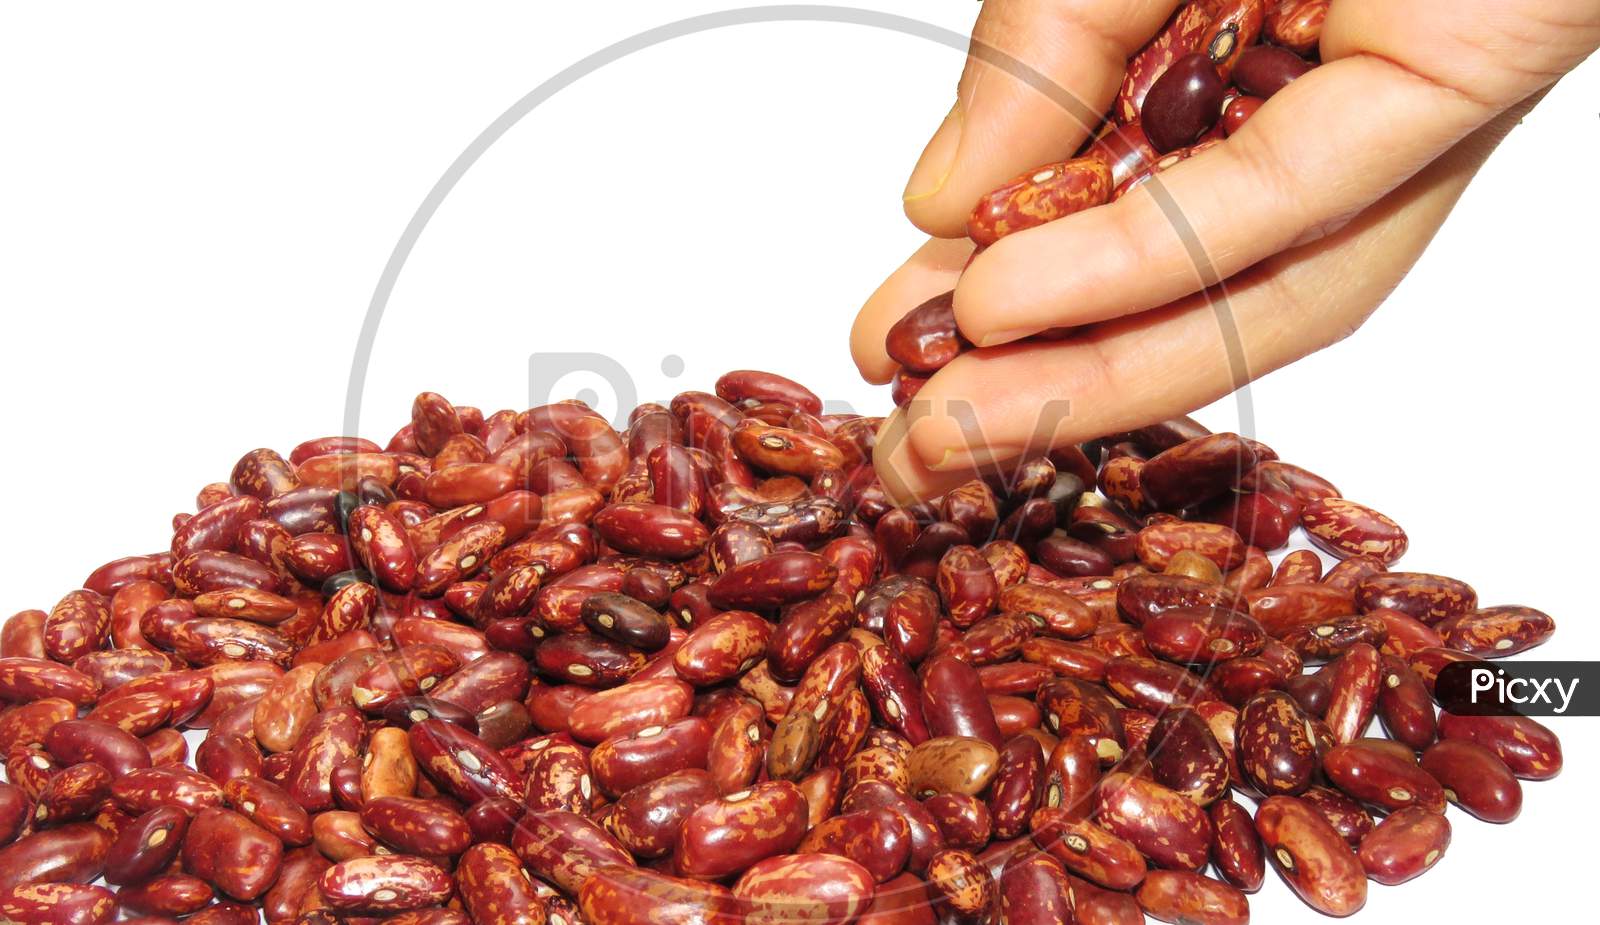 Kidney beans Dropping From Hand On White Background.Isolated Kidney Beans.